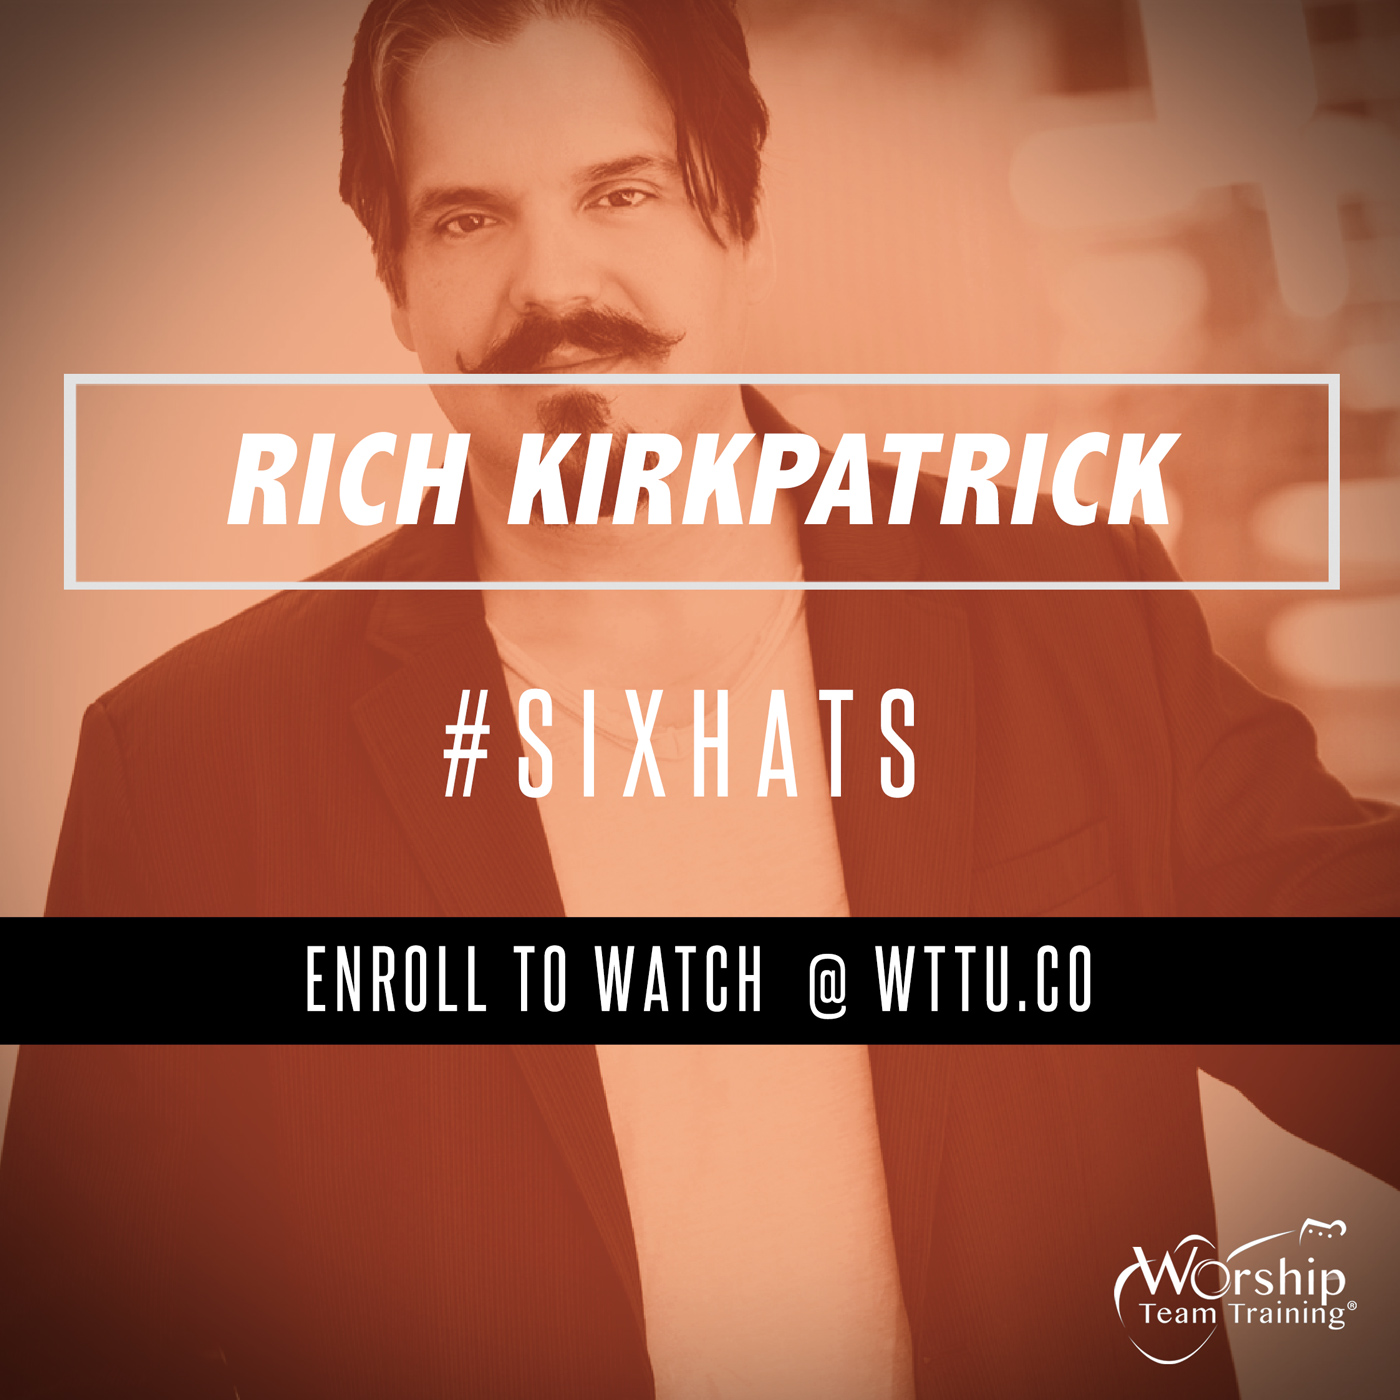 RICH KIRKPATRICK | “The Death of Art, Music and Connection in Church Worship” 9-14-17